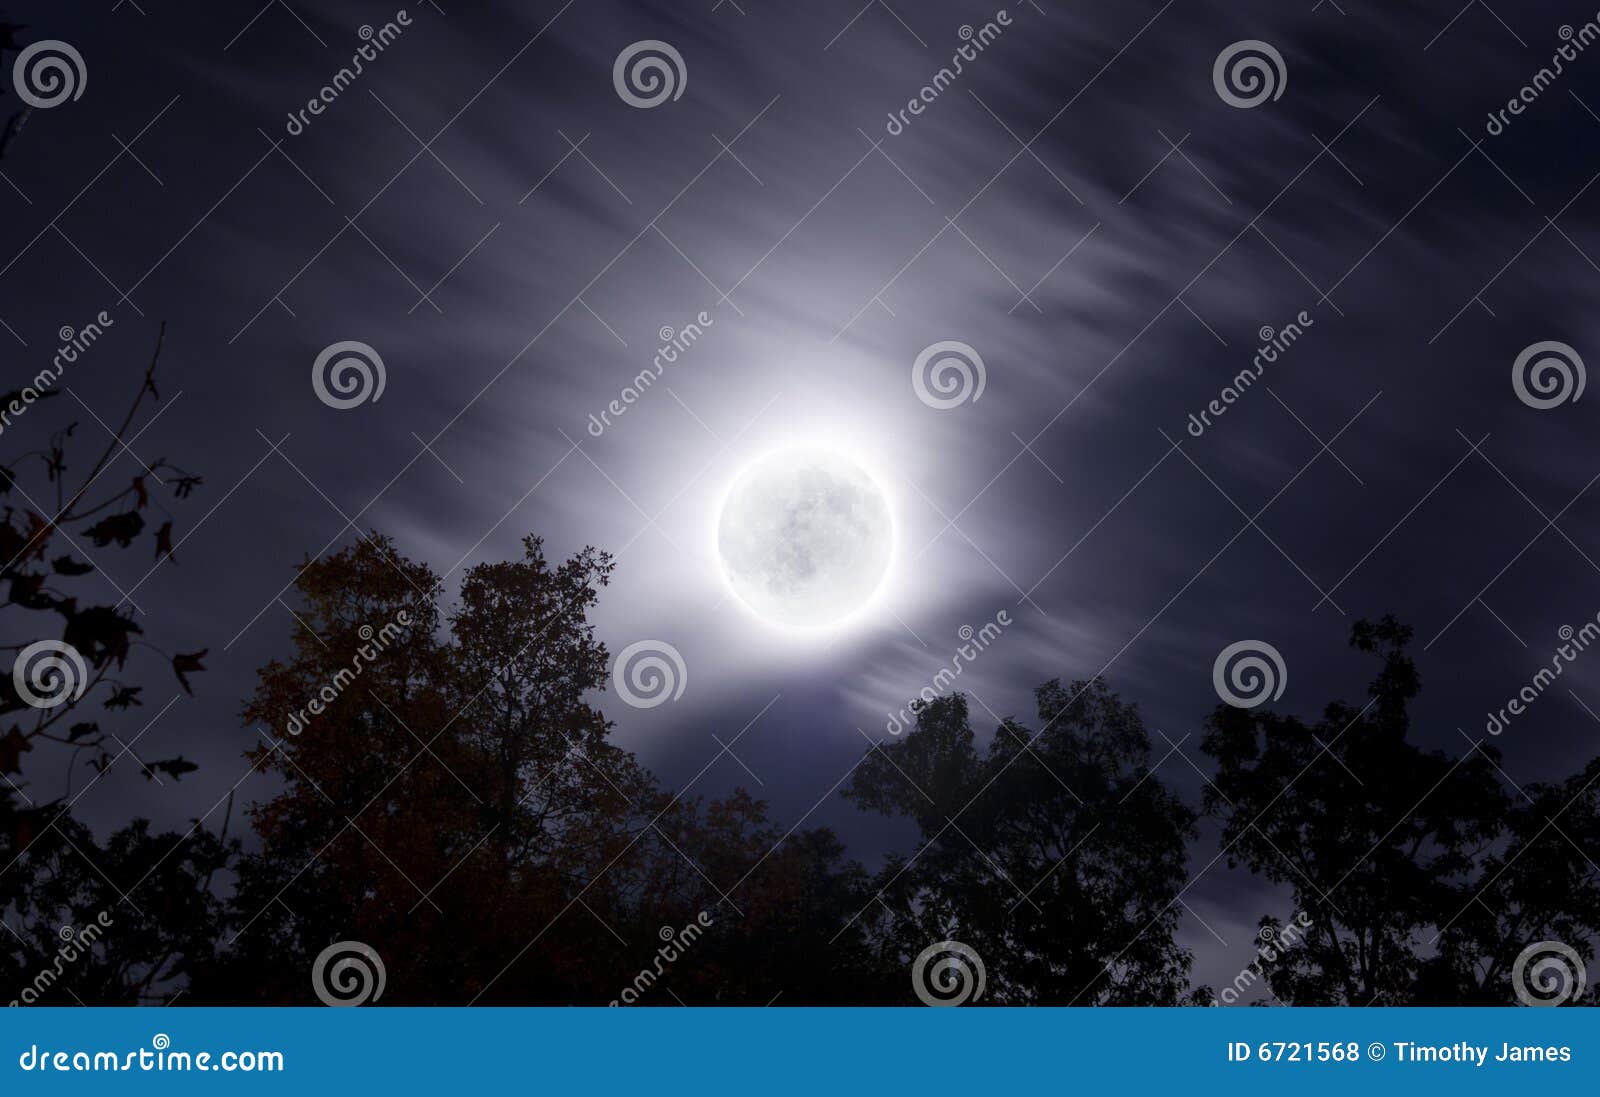 bright moon on fall night with clouds and foliage